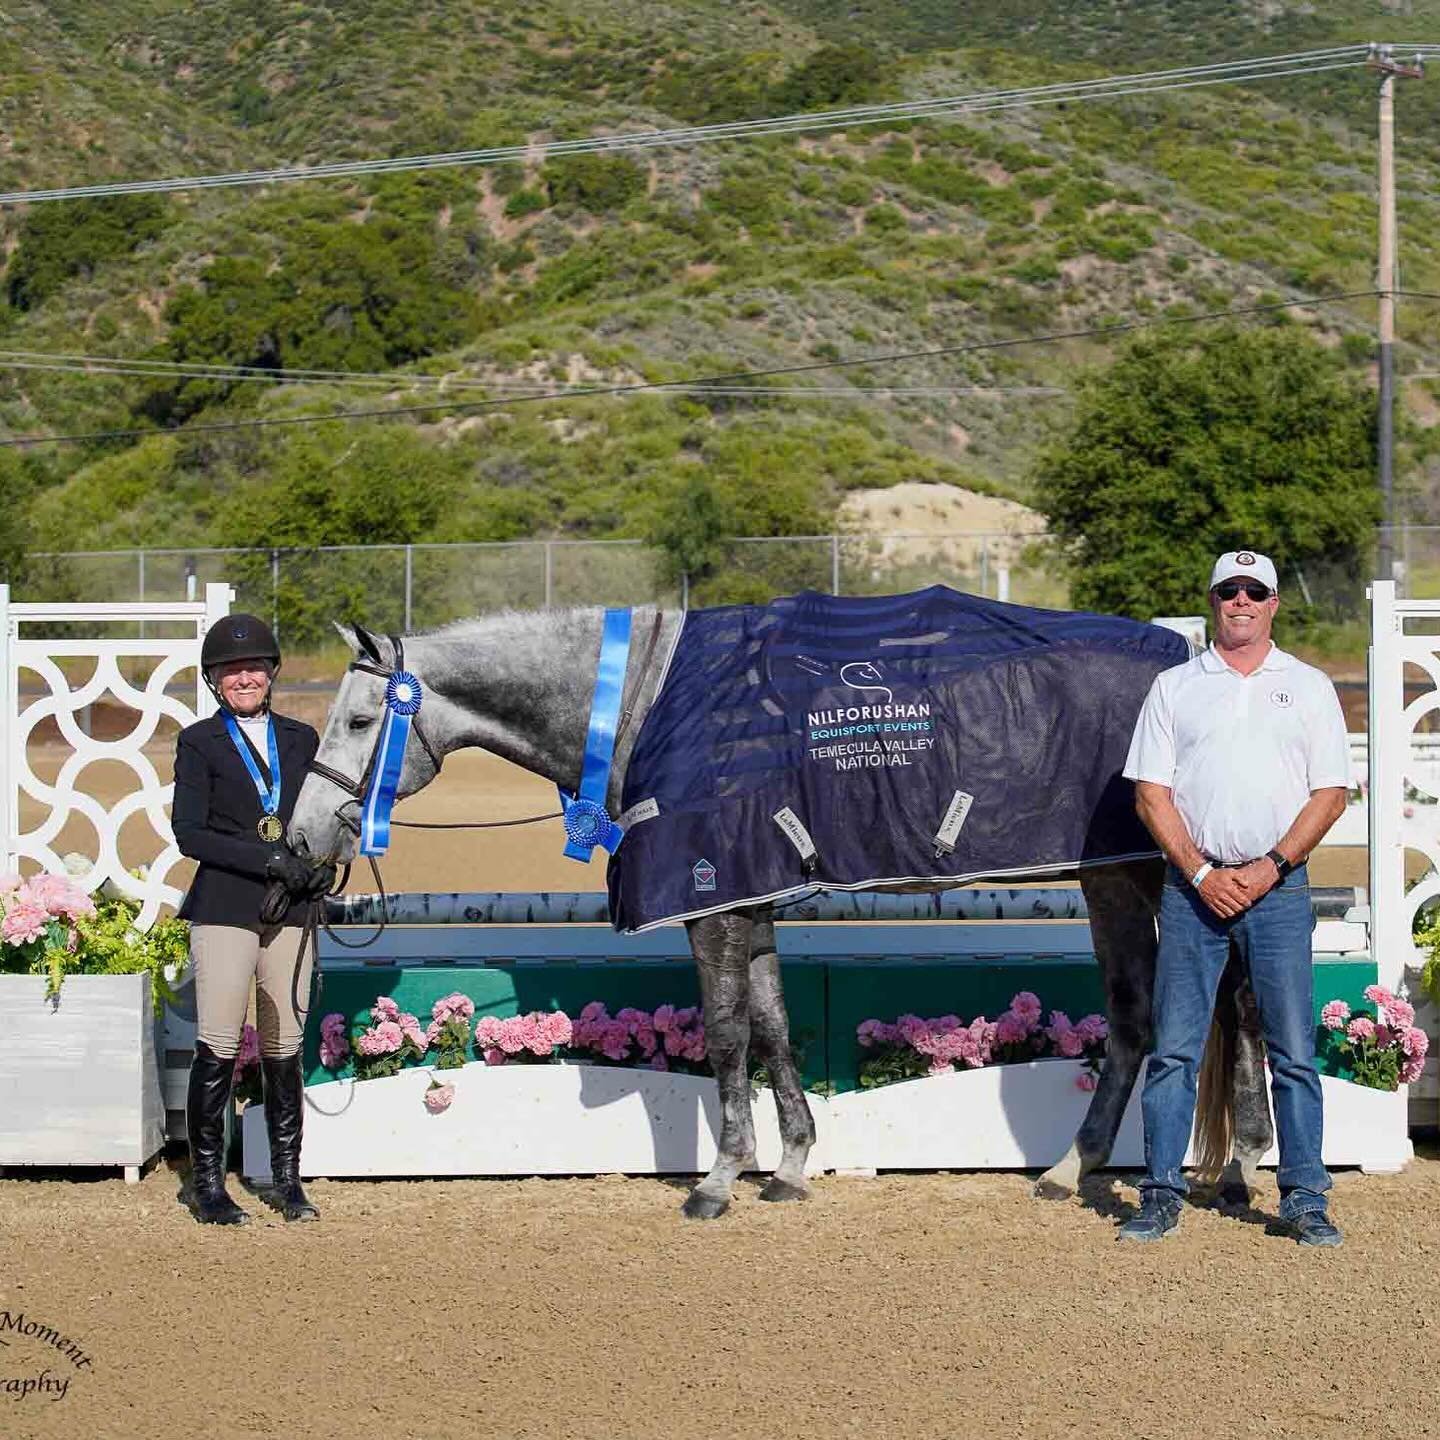 It was an outstanding WCHR week for Amy Brubaker and her two horses!🏆

🌟By The Numbers 3&rsquo; AO Hunter Classic Winner
🌟Gatsby Champion 3&rsquo; AO Hunters and 2nd Place in the 3&rsquo; AO Hunter Classic
🌟Gatsby Champion 3&rsquo;3 Performance H